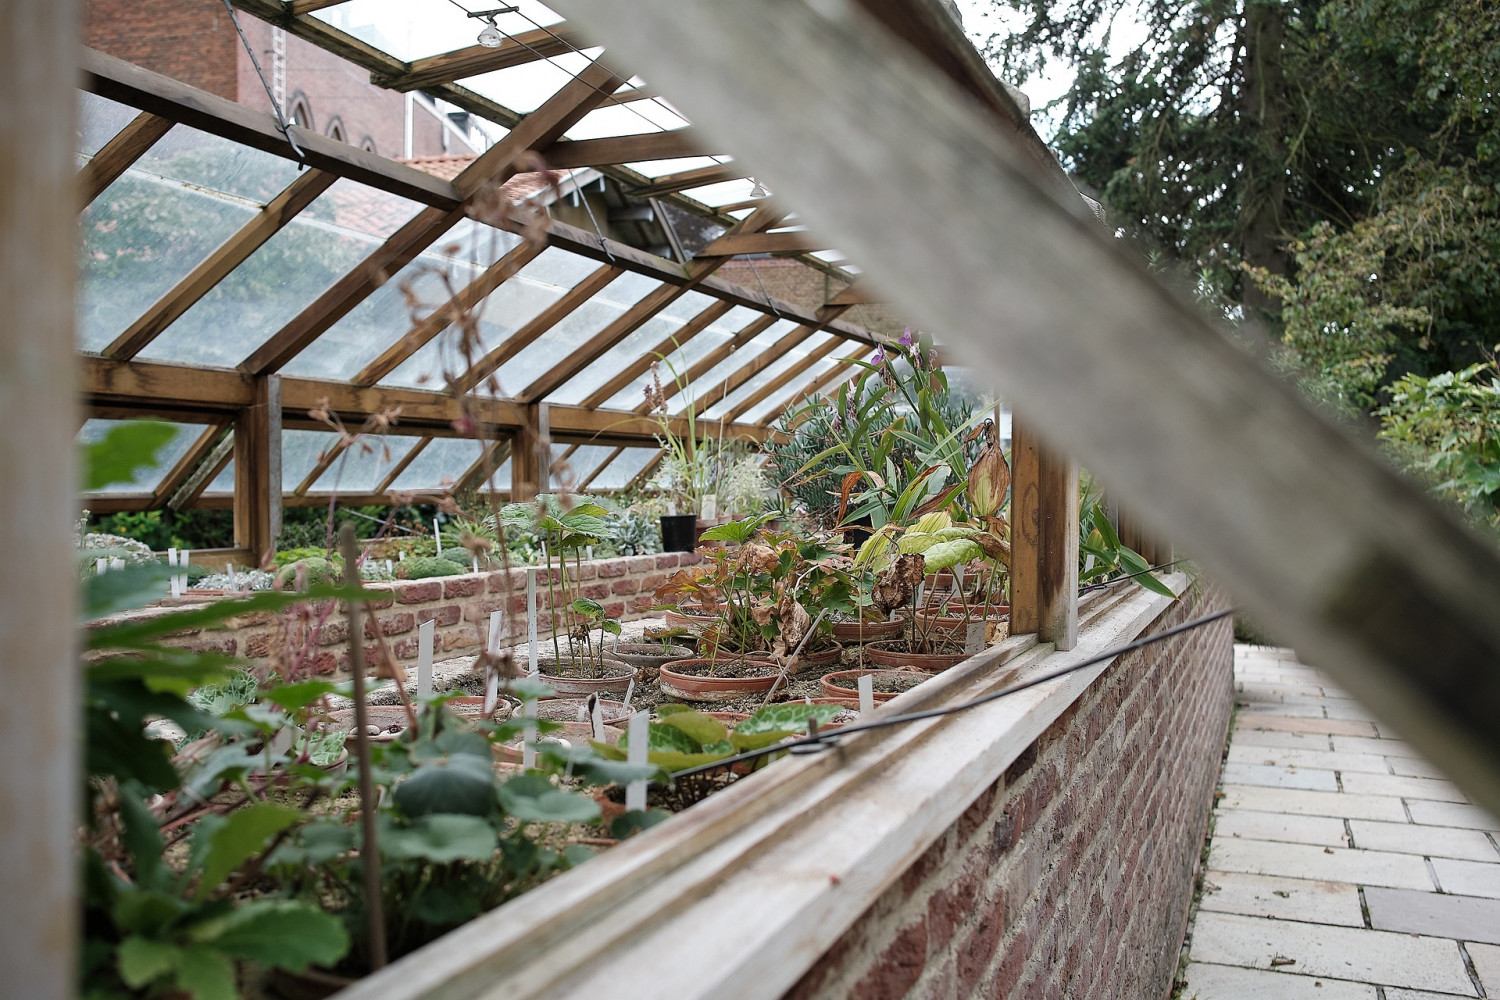 Greenhouse with plants in a community garden